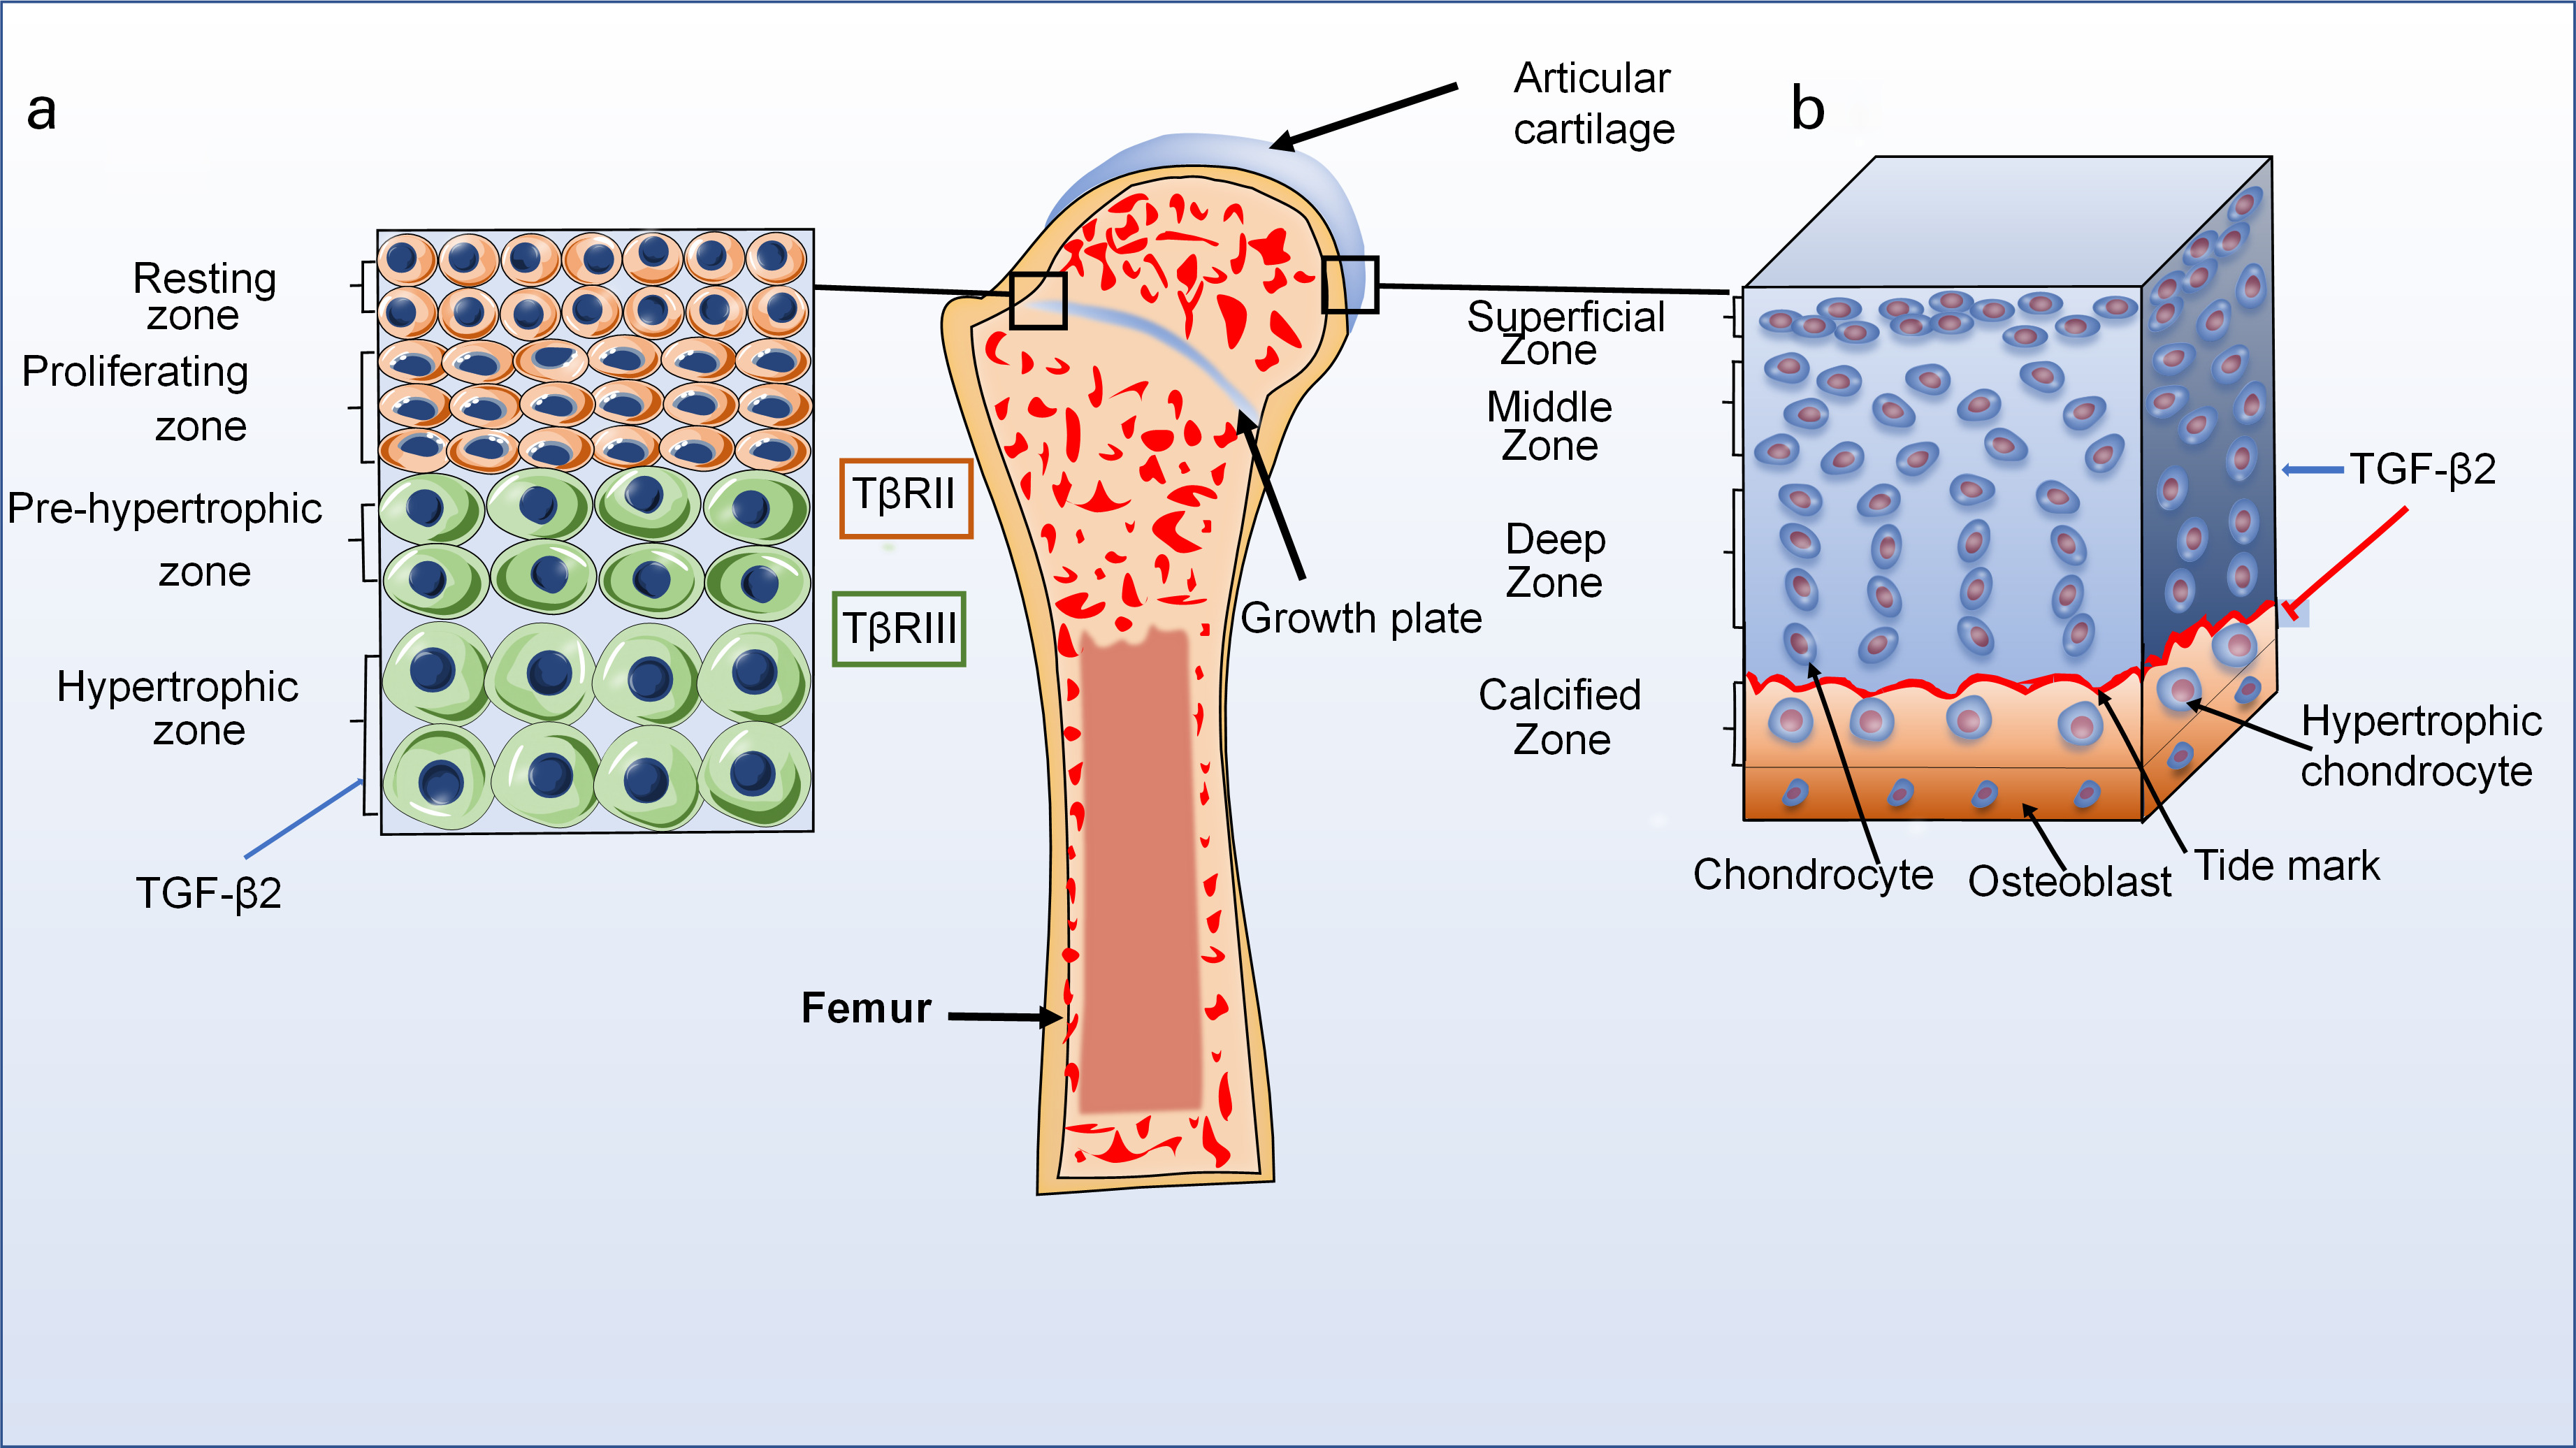 Fig. 3 
          The distribution of transforming growth factor-beta2 (TGF-β2) in normal articular cartilage. a) Normal structure diagram of growth plate (left). The growth plate cartilage is divided into four zones: resting zone, proliferative zone, pre-hypertrophic zone, and hypertrophic zone. TGF-β2 can be expressed in all zones during cartilage development, but the highest levels are in hypertrophy zone. Interestingly, TGF-β2 has low affinity for transforming growth factor beta receptor (TβR)II but a strong affinity for TβRIII. b) Normal structure diagram of articular cartilage (right). The articular cartilage is also divided into four zones: superficial zone, middle zone, deep zone, and calcified zone. TGF-β2 signalling pathways can maintain chondrocyte phenotype, and inhibit pre-hypertrophic and hypertrophic differentiation in articular cartilage.
        